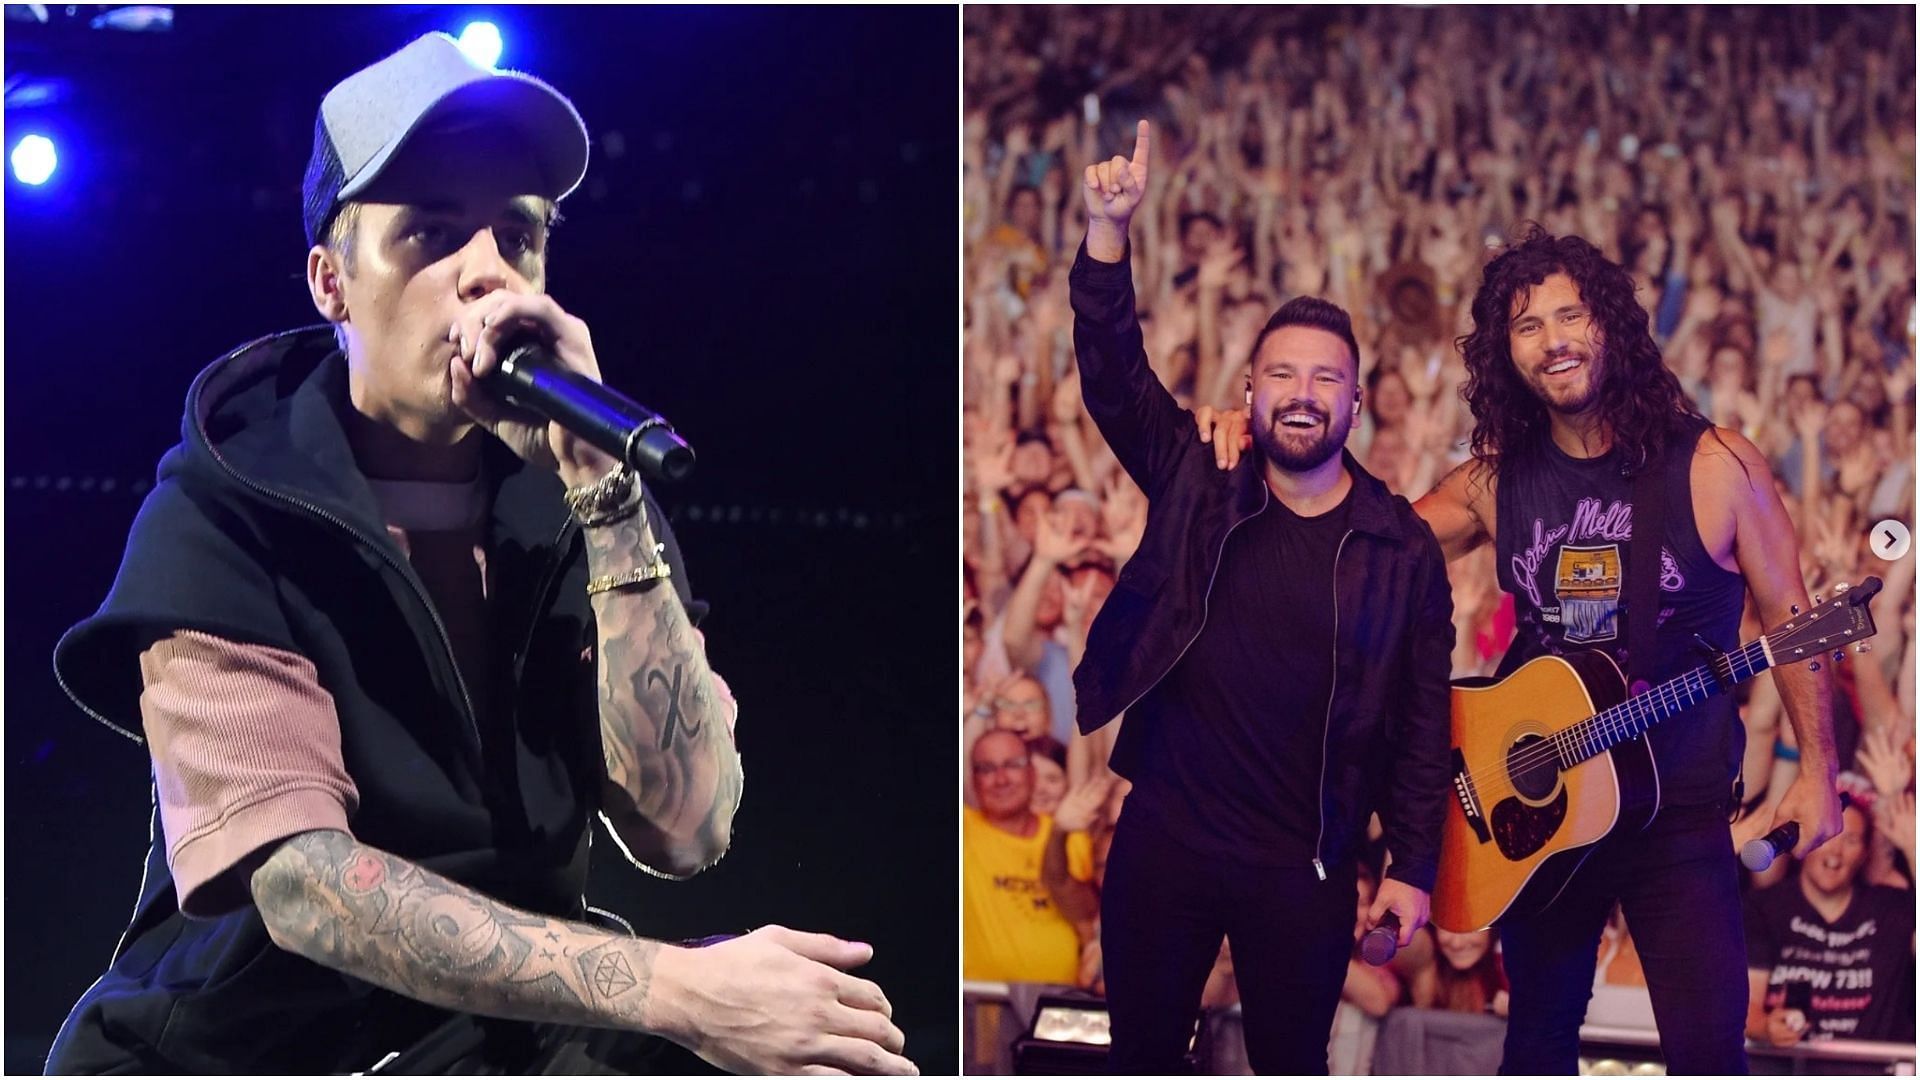 Justin Bieber and Dan + Shay have been sued in a copyright infringement case. (Images via Jason Merritt / Getty and Instagram / @danandshay)